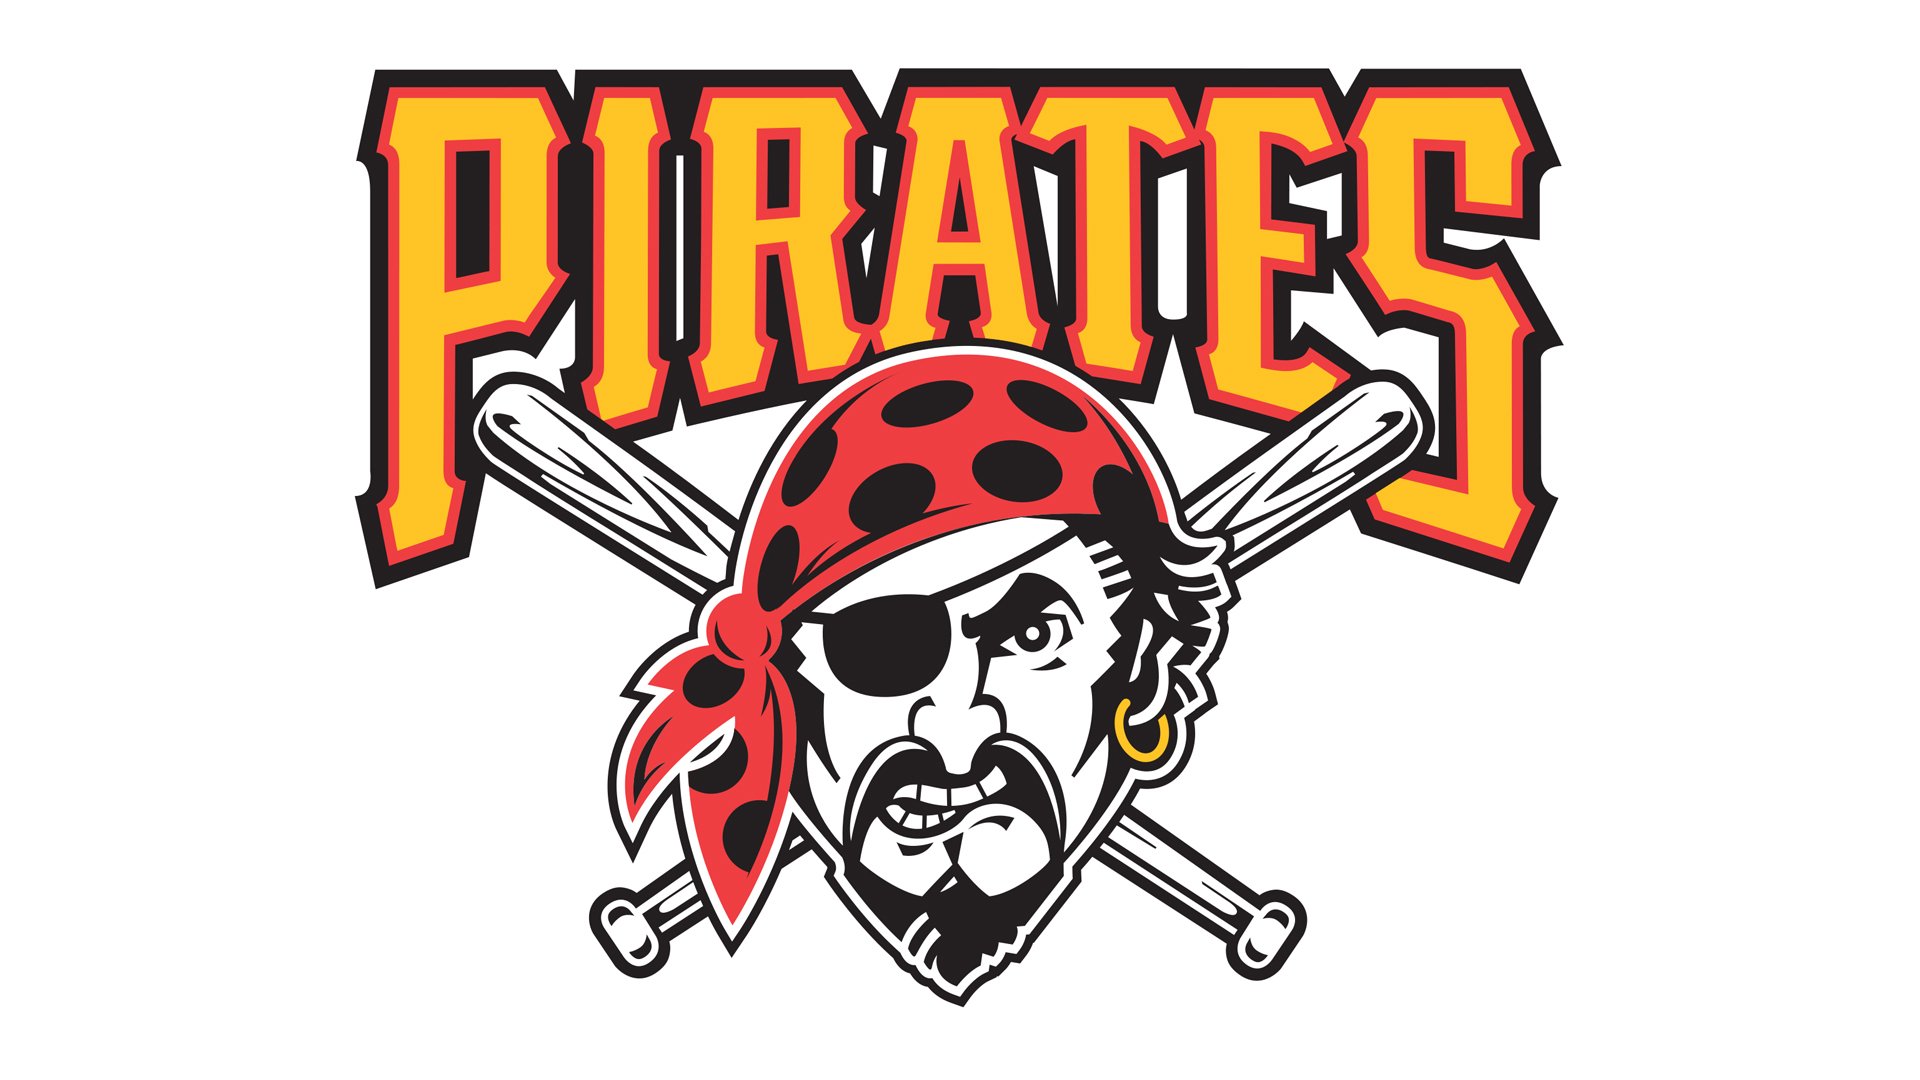 The embroidered logo of the Pittsburg Pirates looks on during the